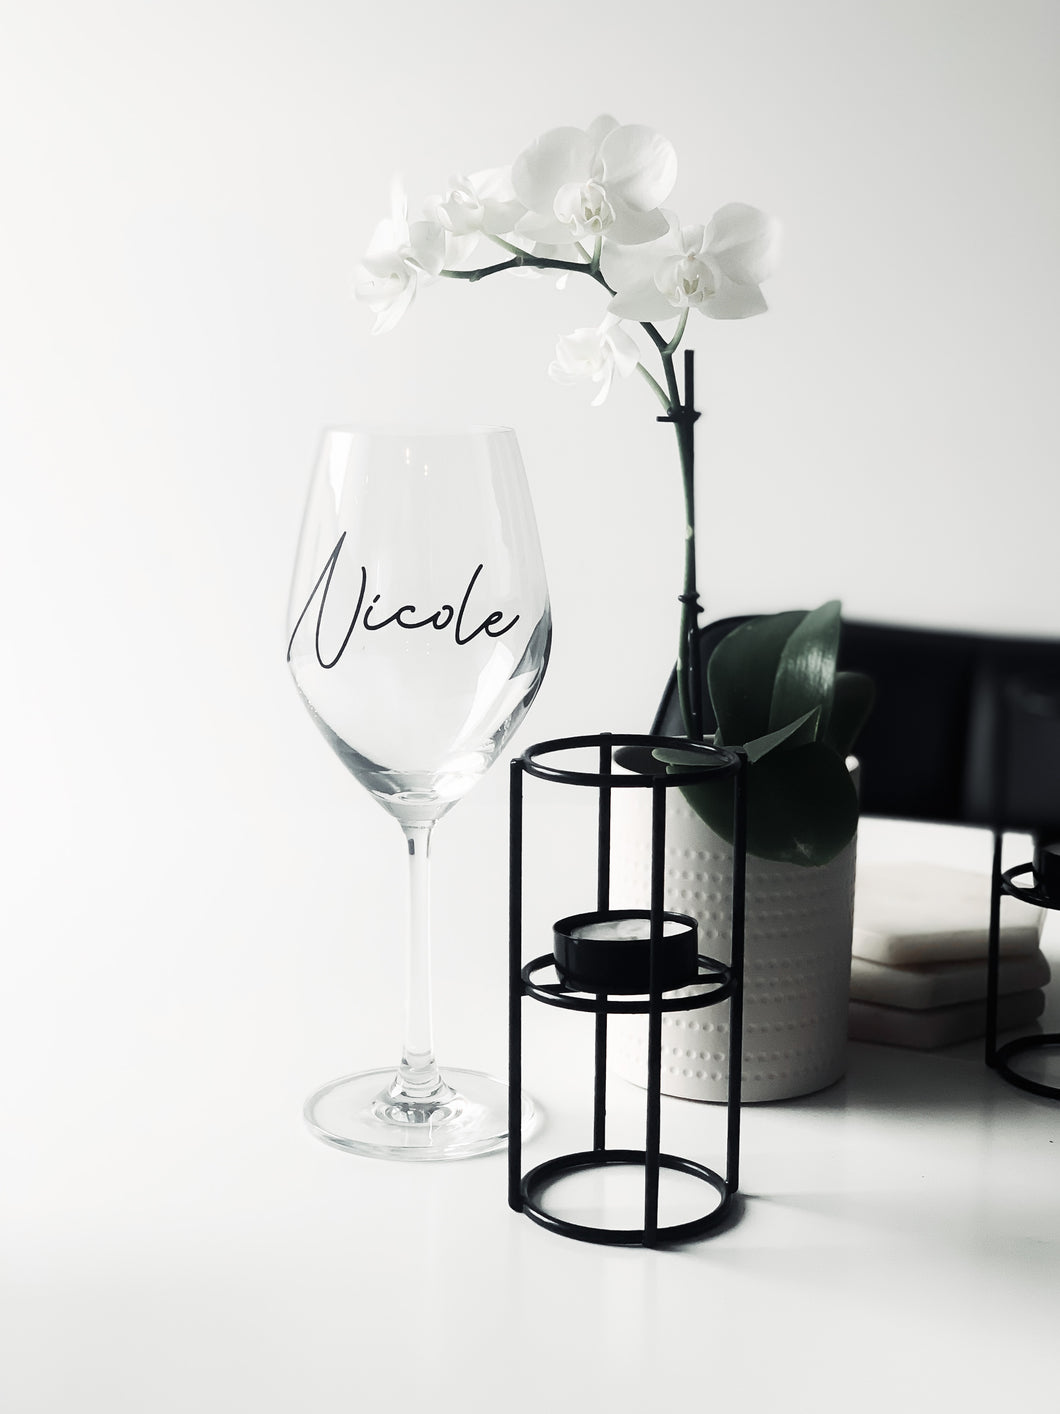 NAME OR INITIAL WINE GLASS